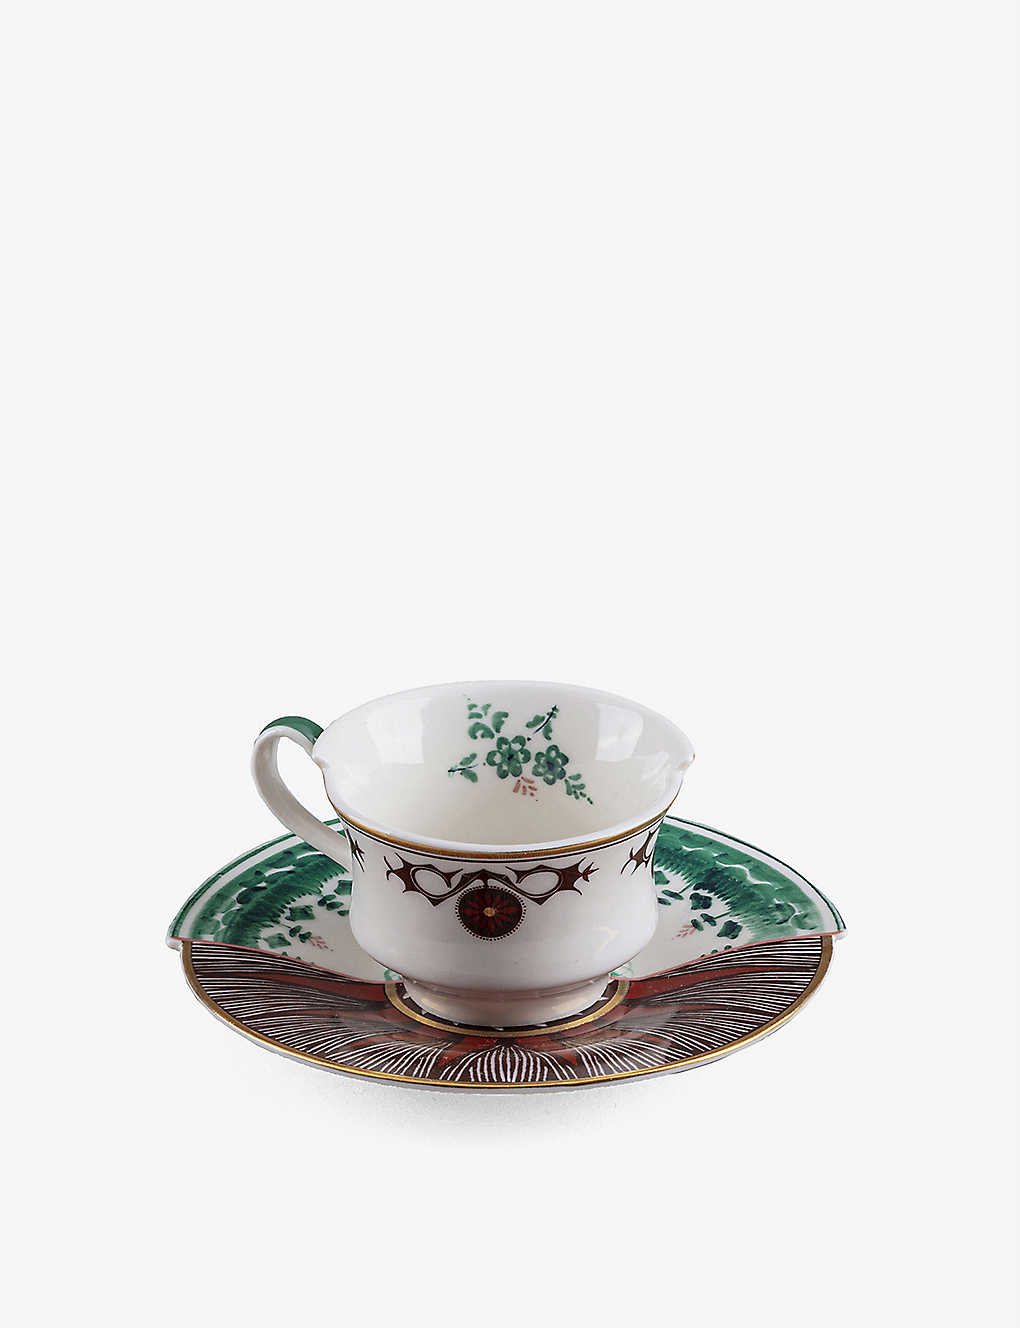 Seletti Hybrid Chucuito Porcelain Coffee Cup And Saucer